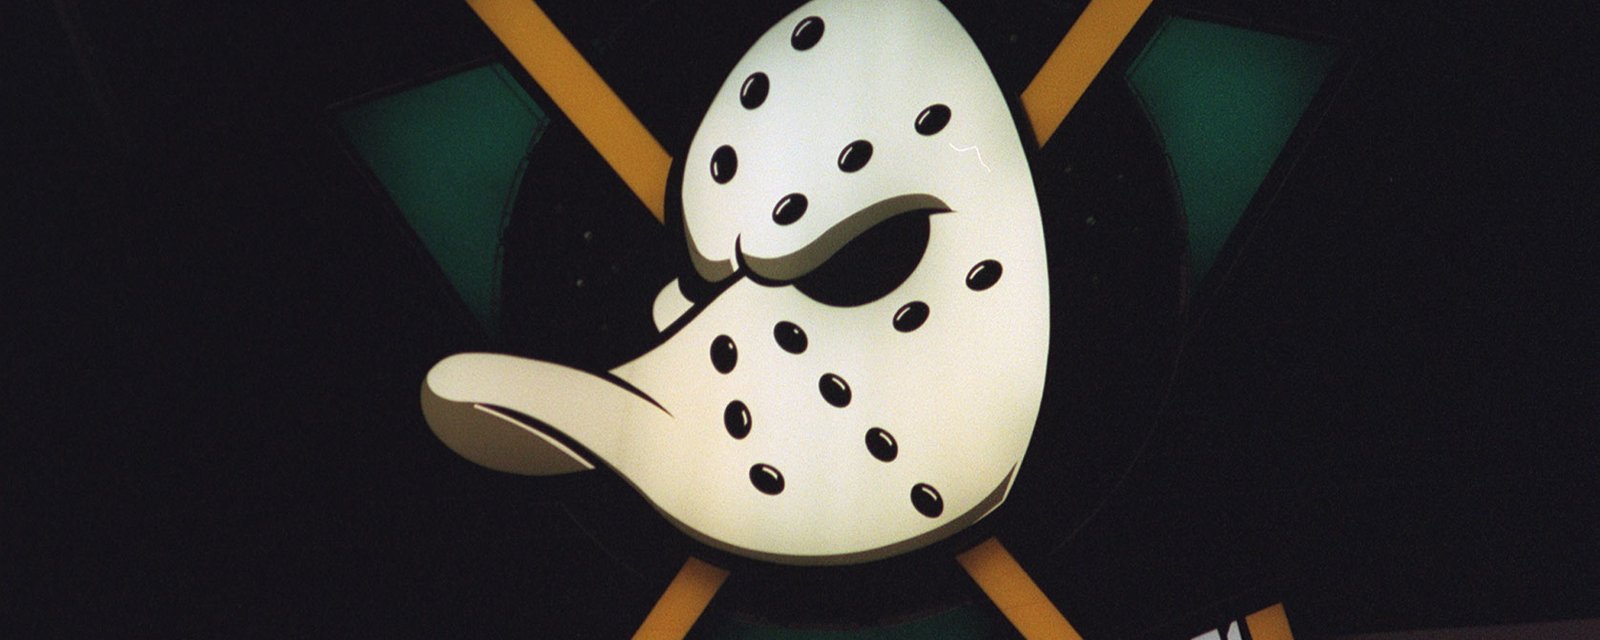 Must See: ECHL team teases “Mighty Ducks” Night with awesome jerseys